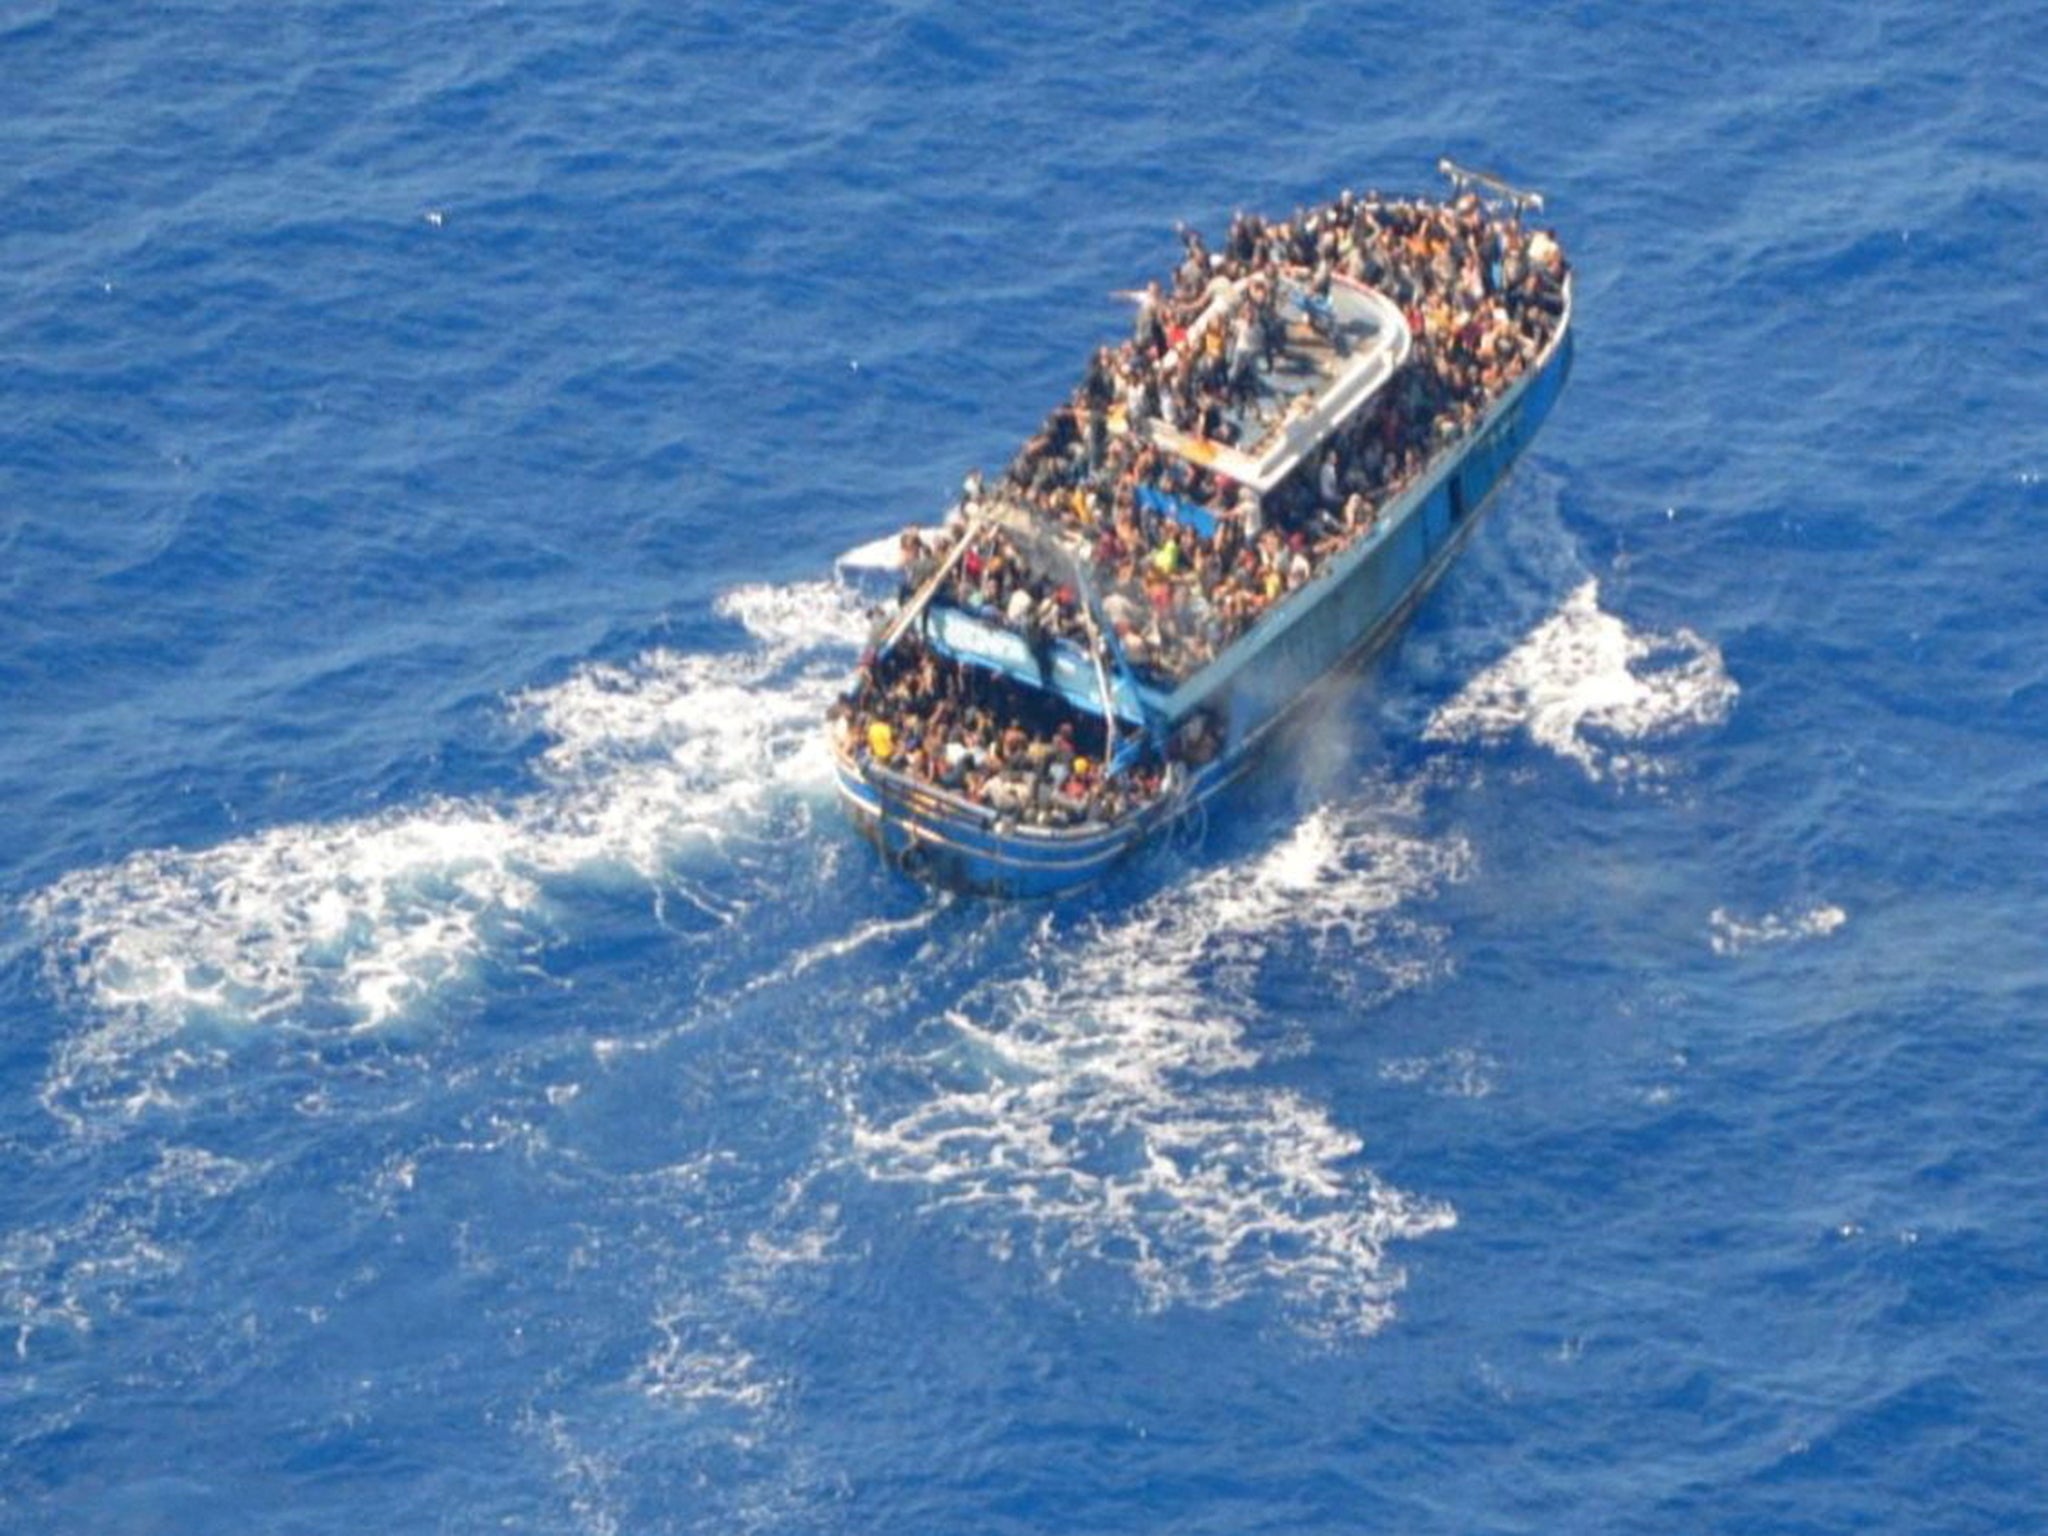 The dilapidated boat had up to 750 migrants onboard